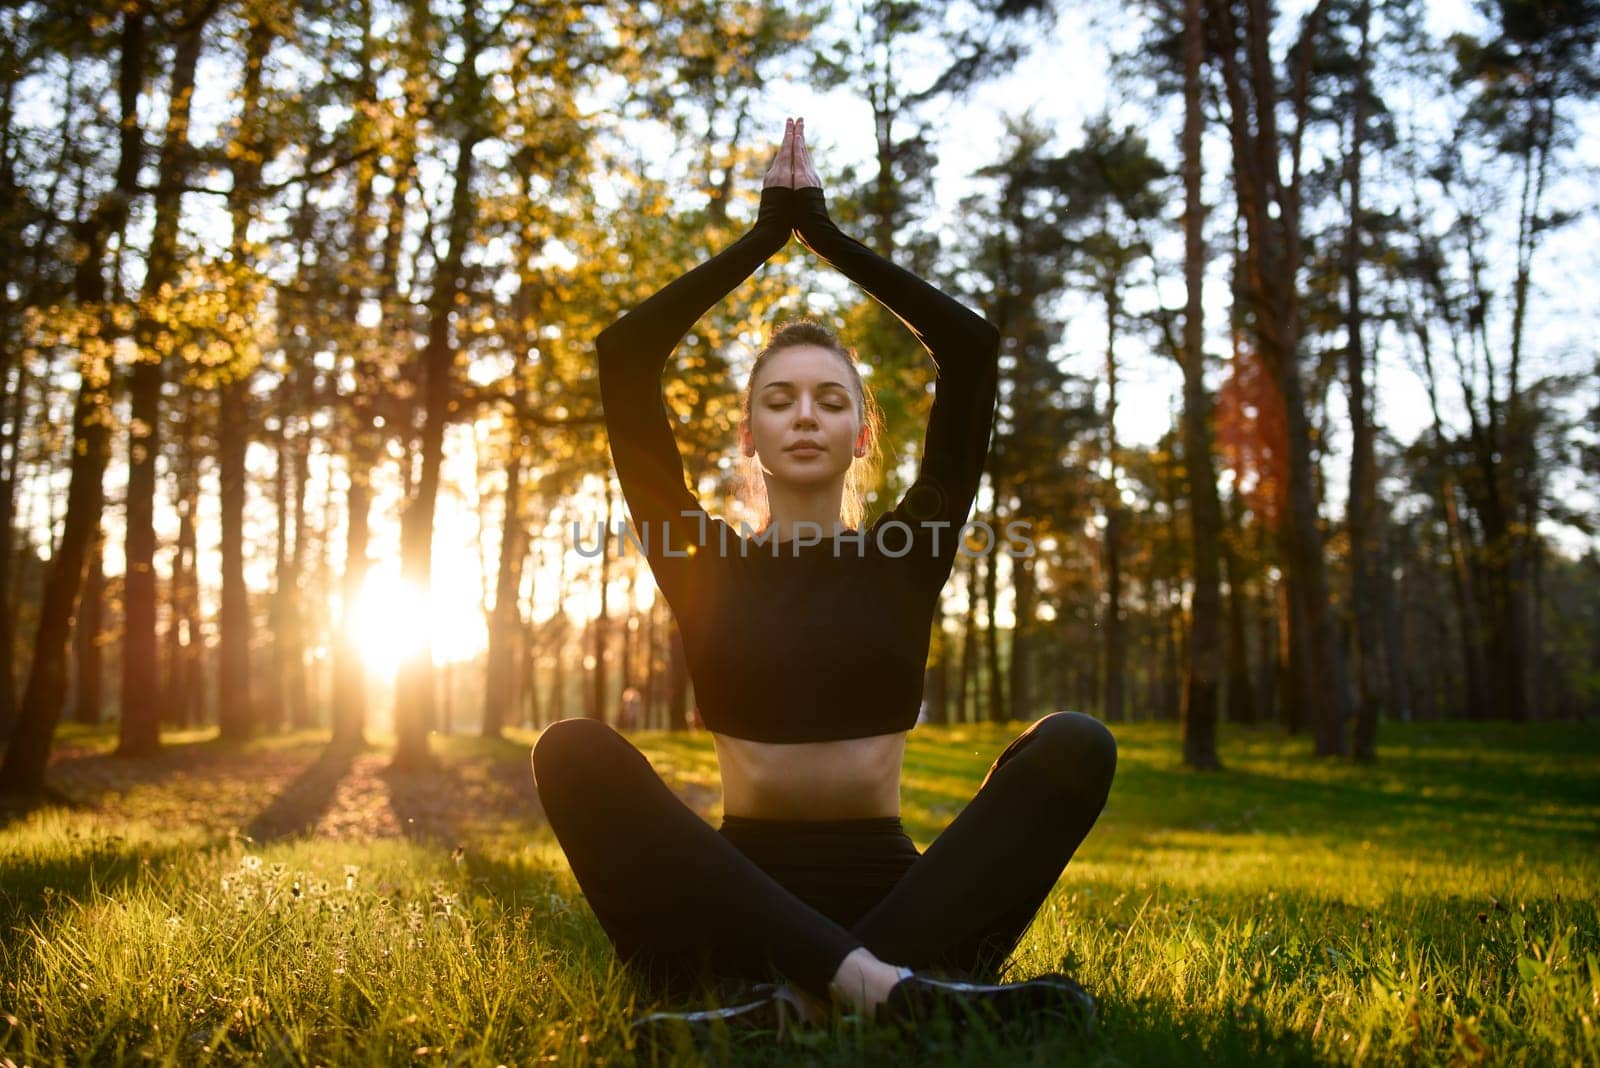 A woman practices yoga meditation at dawn in a peaceful forest, connecting with nature and serene surroundings